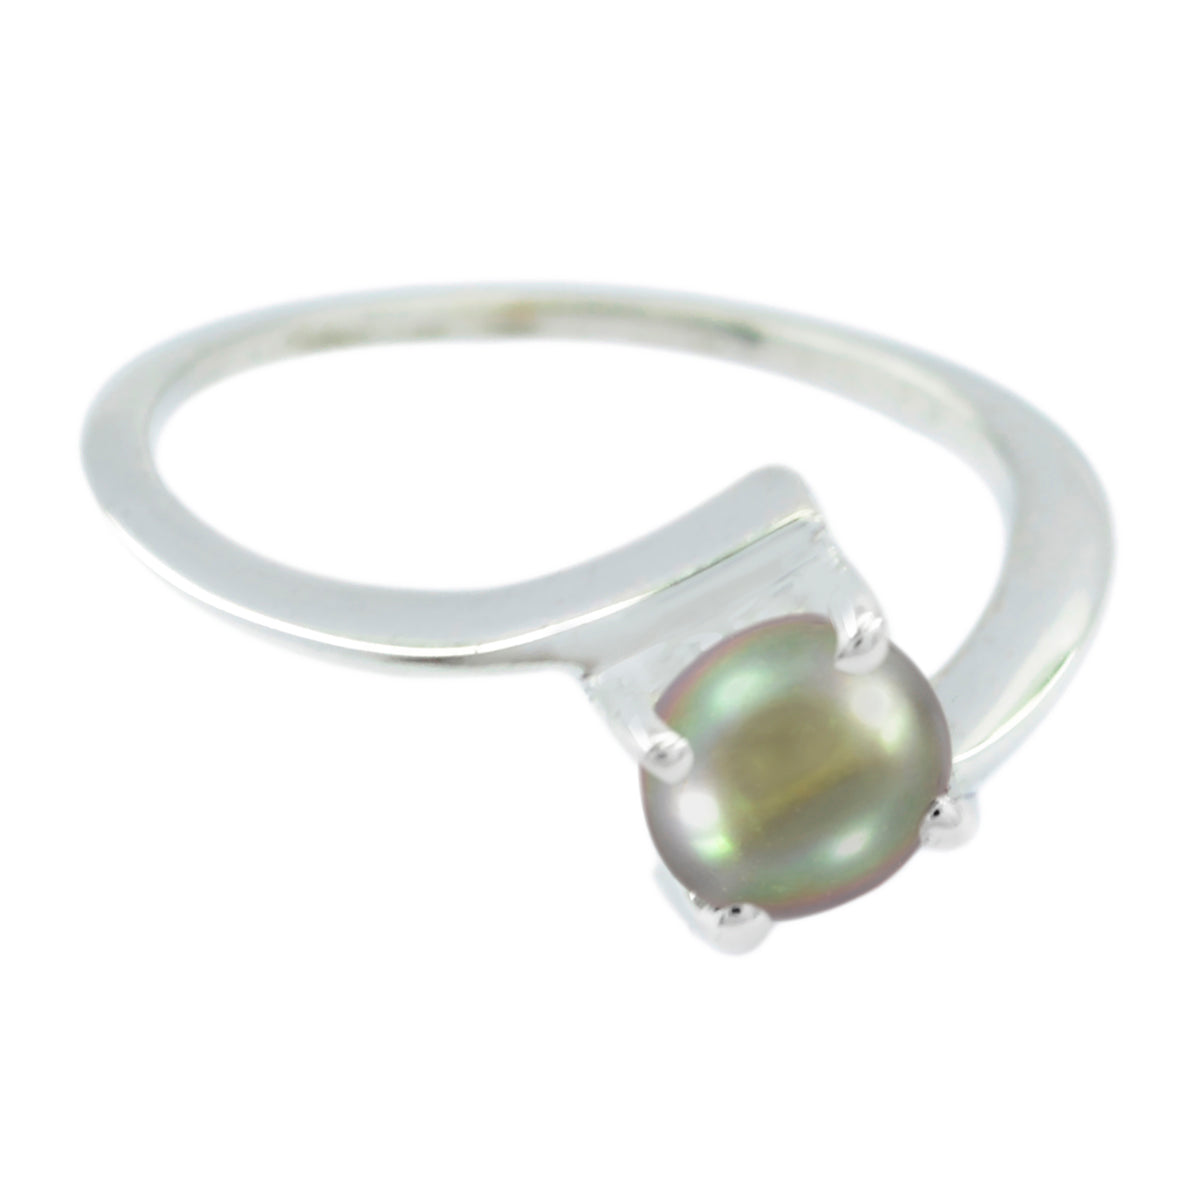 Appealing Gemstone Pearl Solid Silver Rings Daith Piercing Jewelry